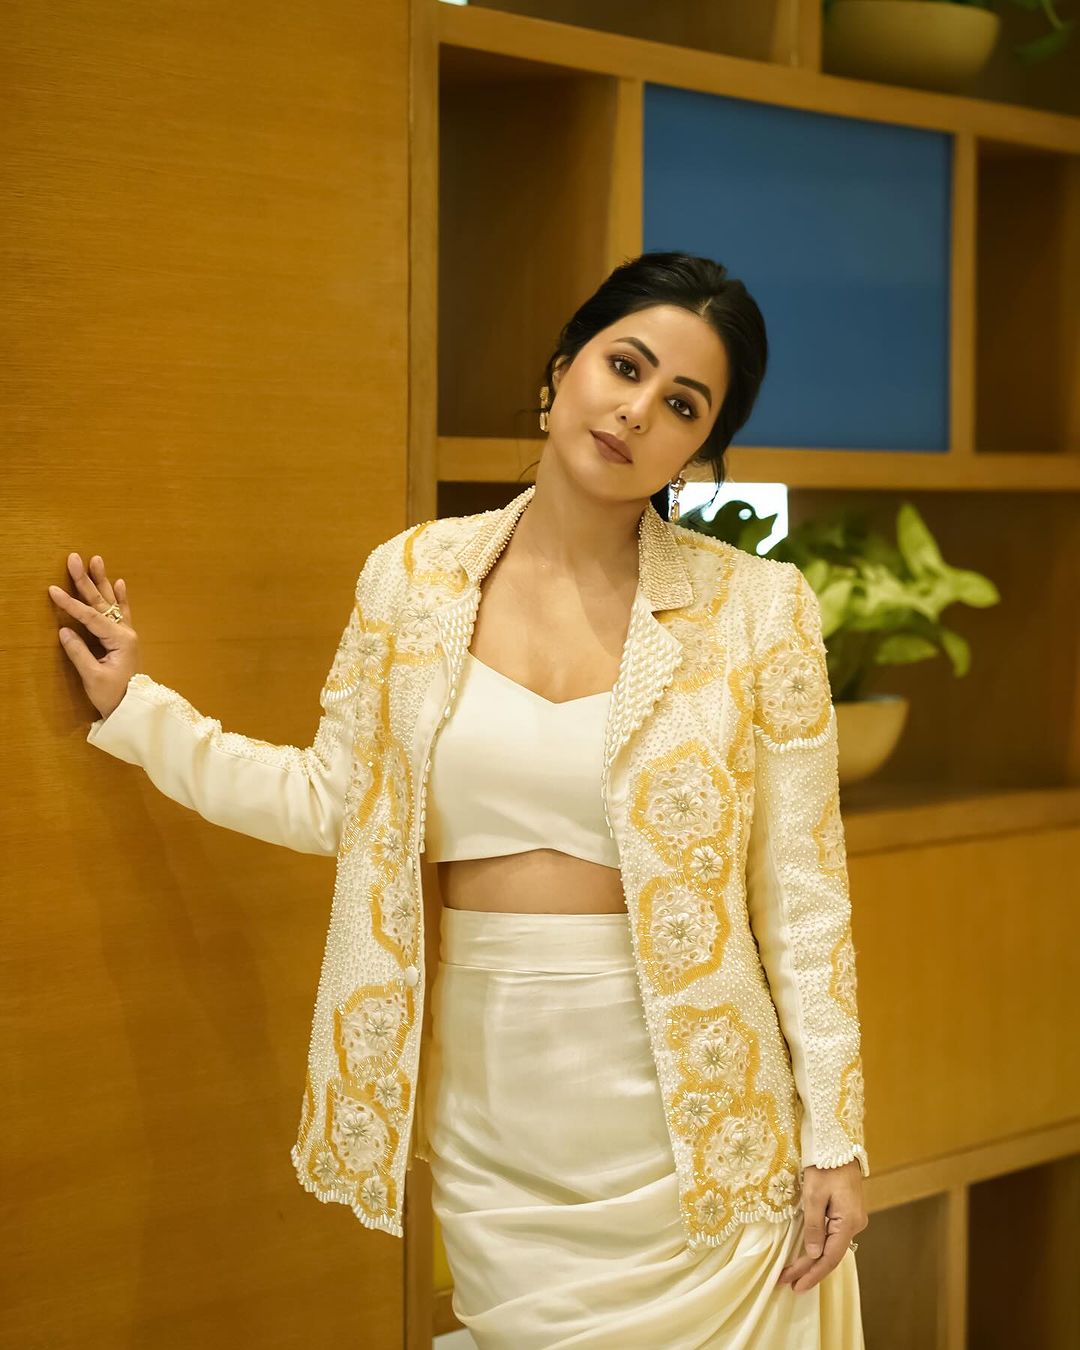 Hina Khan Wishes To Skip Shooting During Period. Her Words Reflects Every Women’s Struggles. Explore About It!